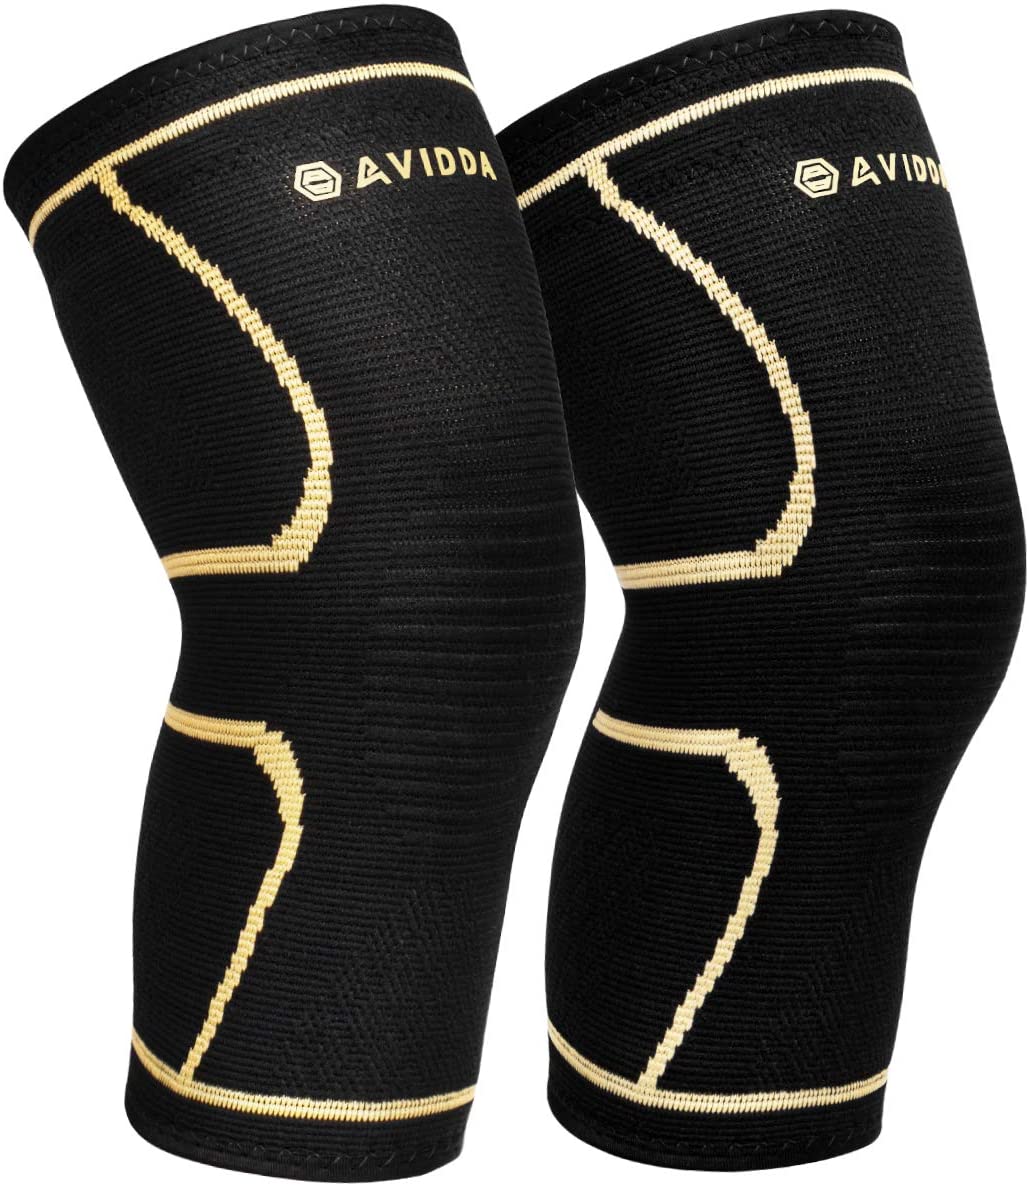 AVIDDA Knee Support Brace 2 Pack - Compression Knee Sleeves for Arthritis, Joint Pain, Ligament Injury, Meniscus Tear, ACL, MCL, Tendonitis, Running, Squats, Sports Black Gold XL-Large